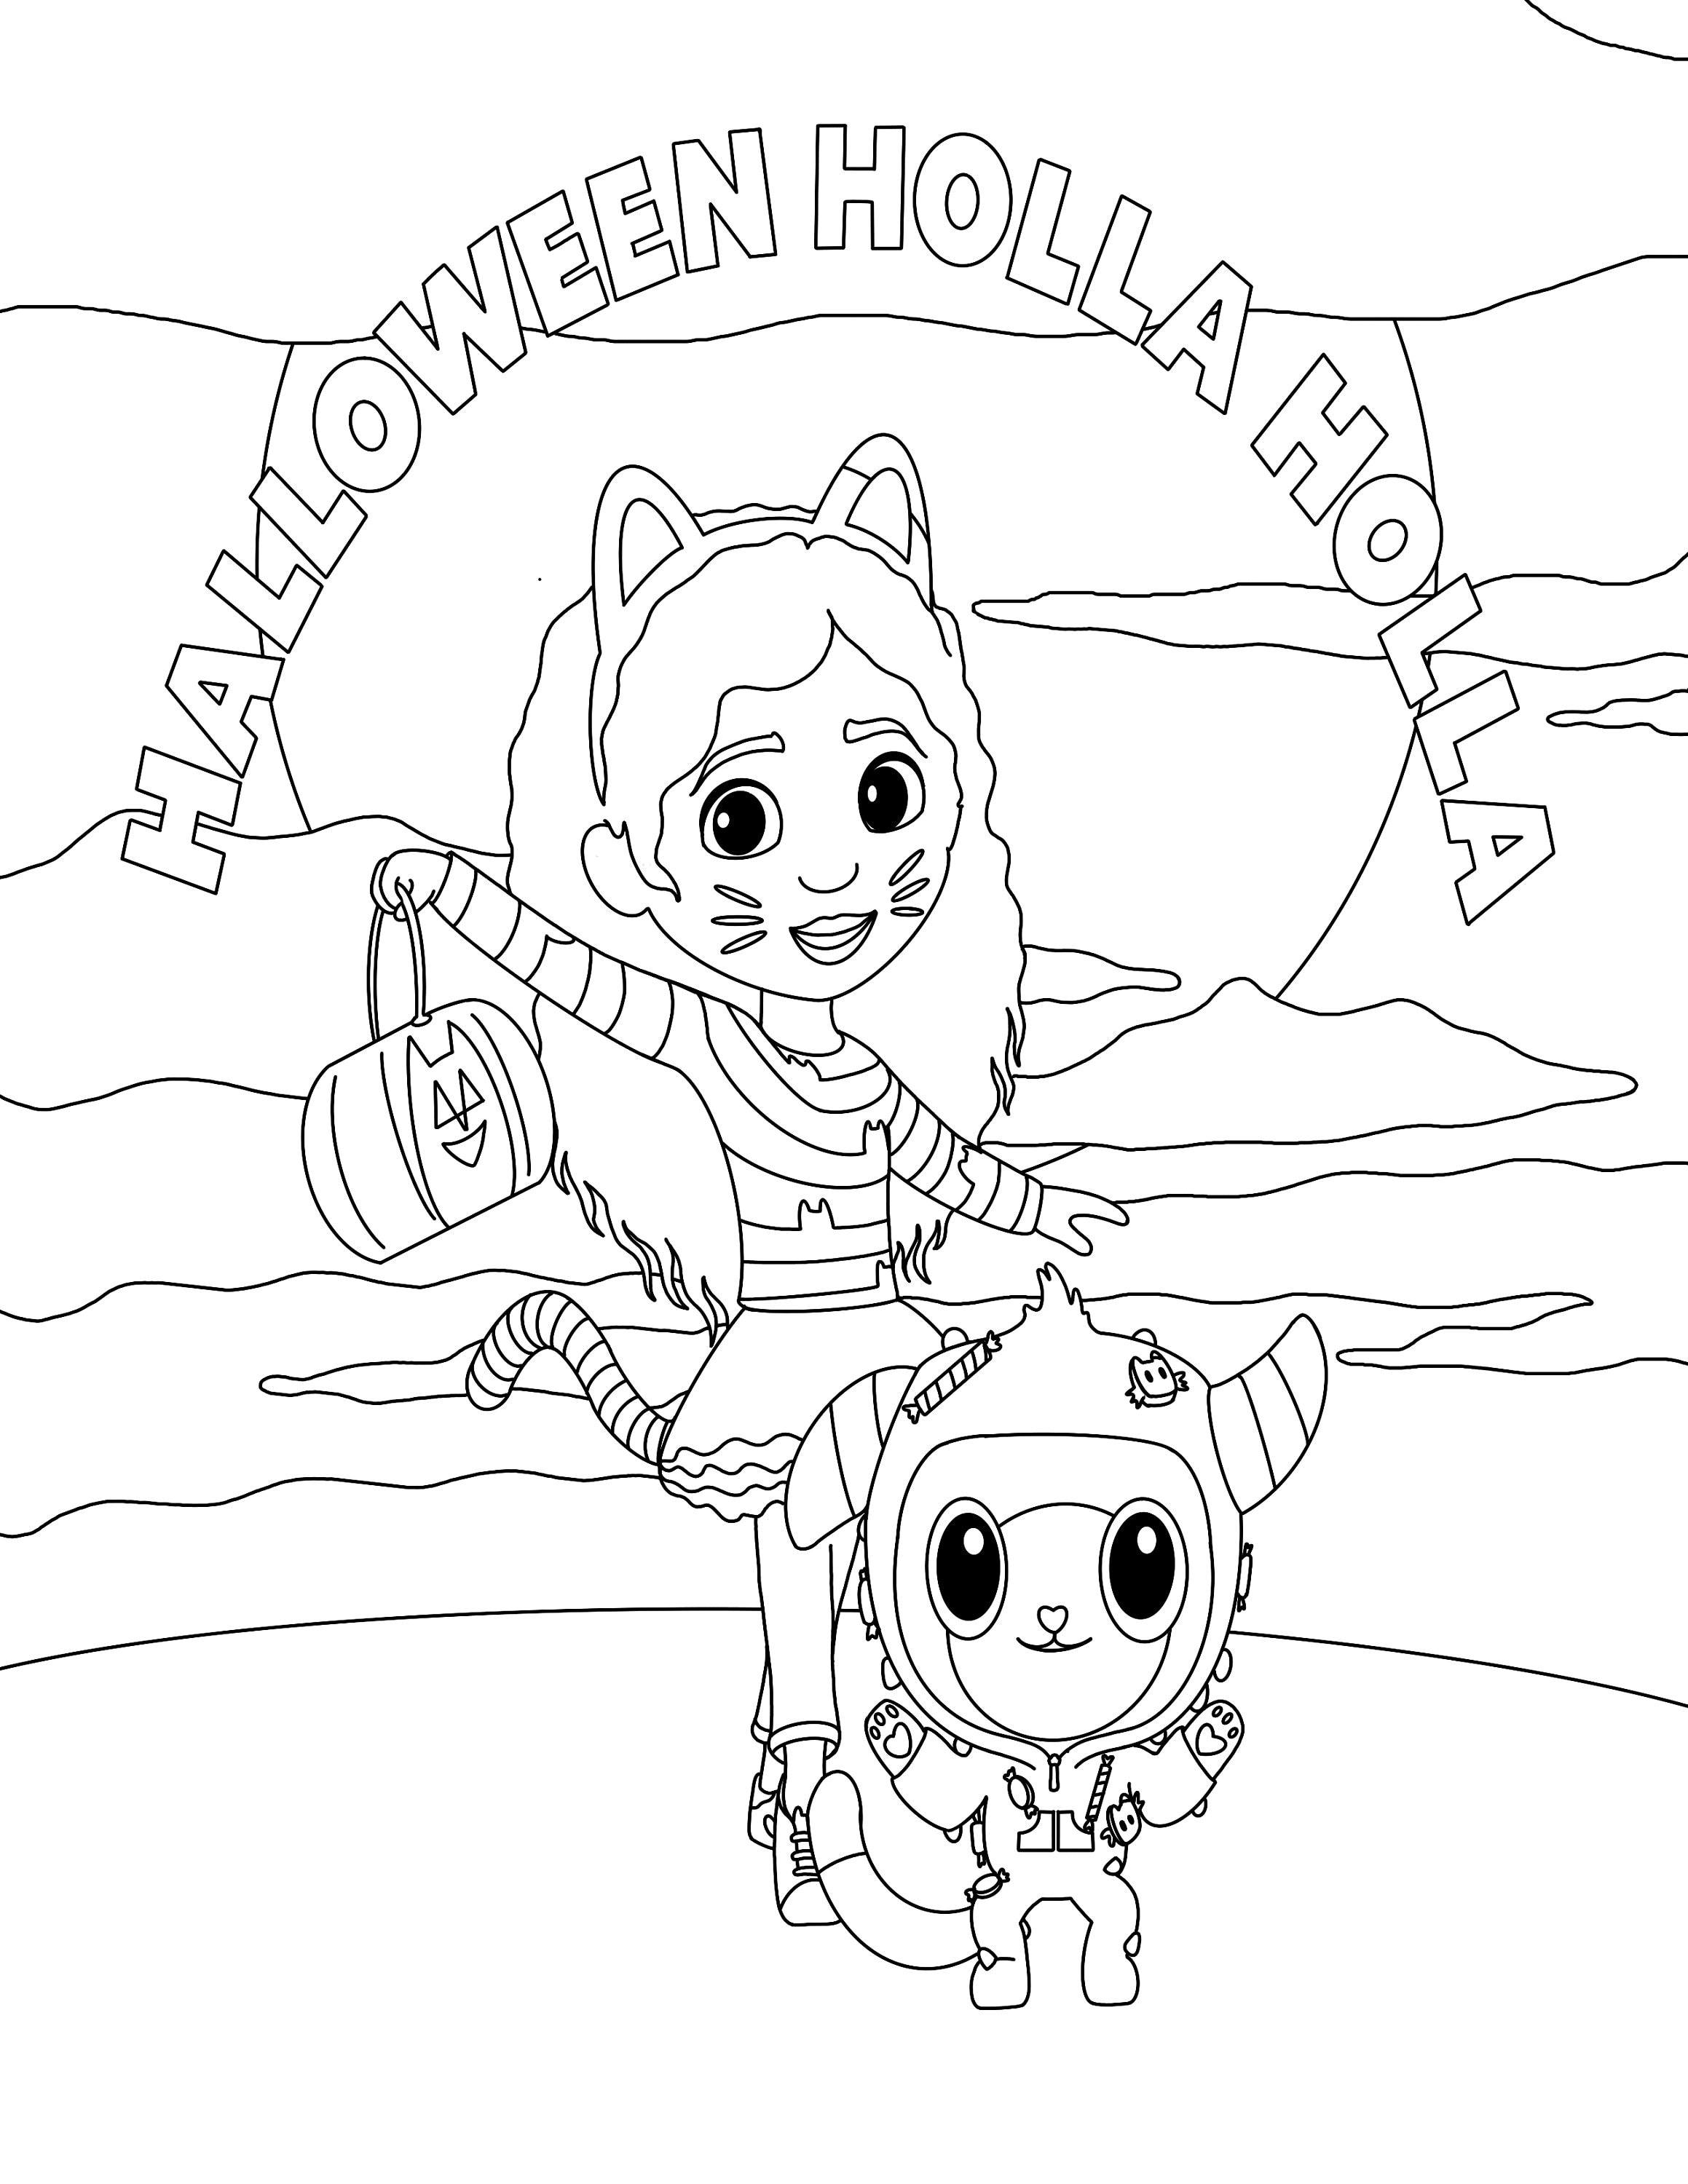 Gabbys dollhouse halloween coloring sheet featuring gabby and pandy in halloween costume digital download